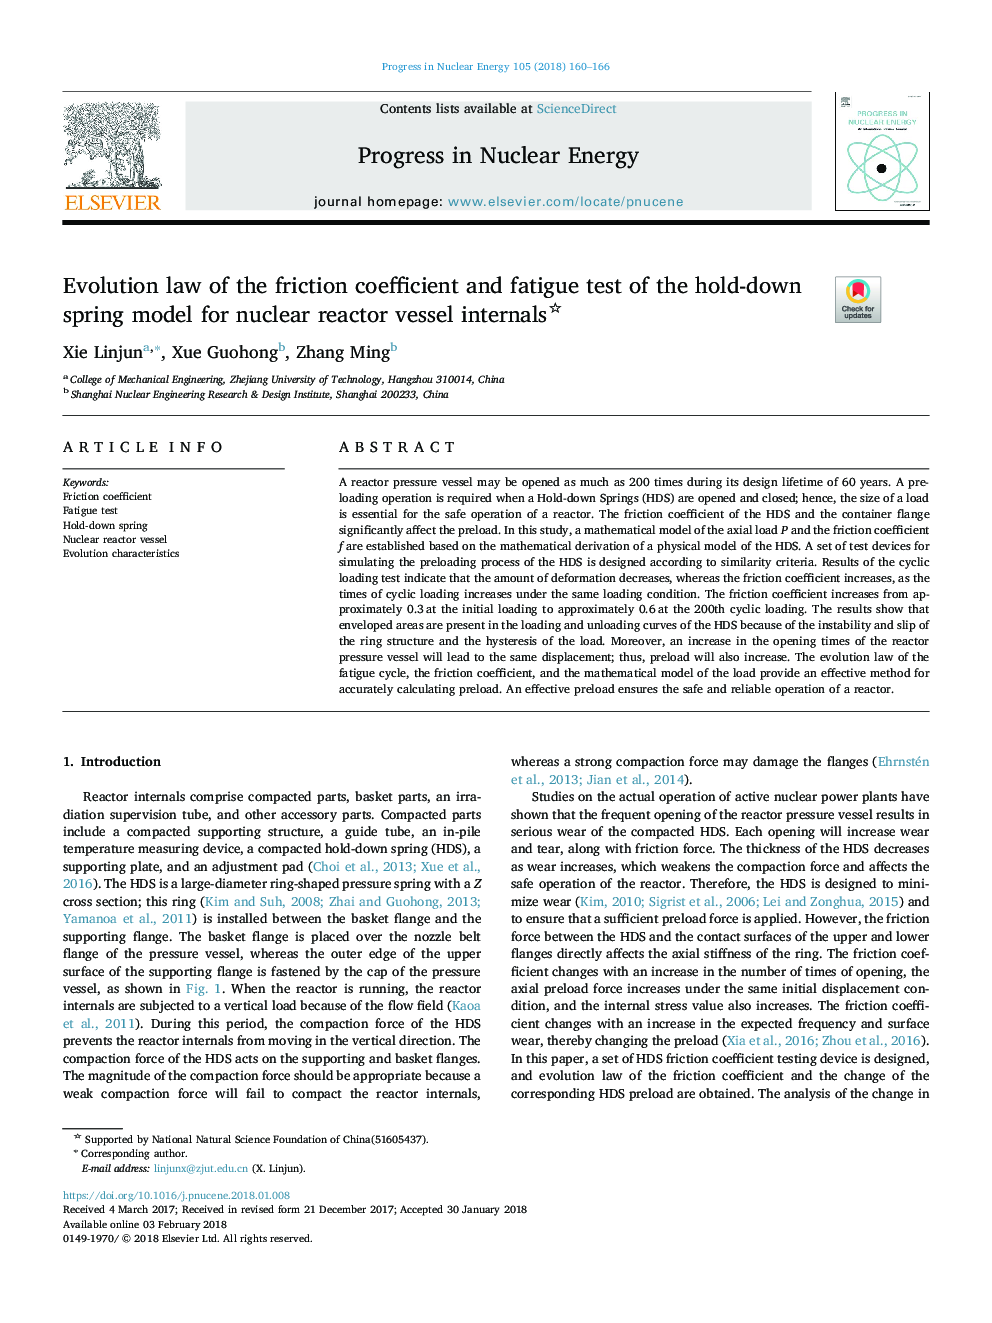 Evolution law of the friction coefficient and fatigue test of the hold-down spring model for nuclear reactor vessel internals